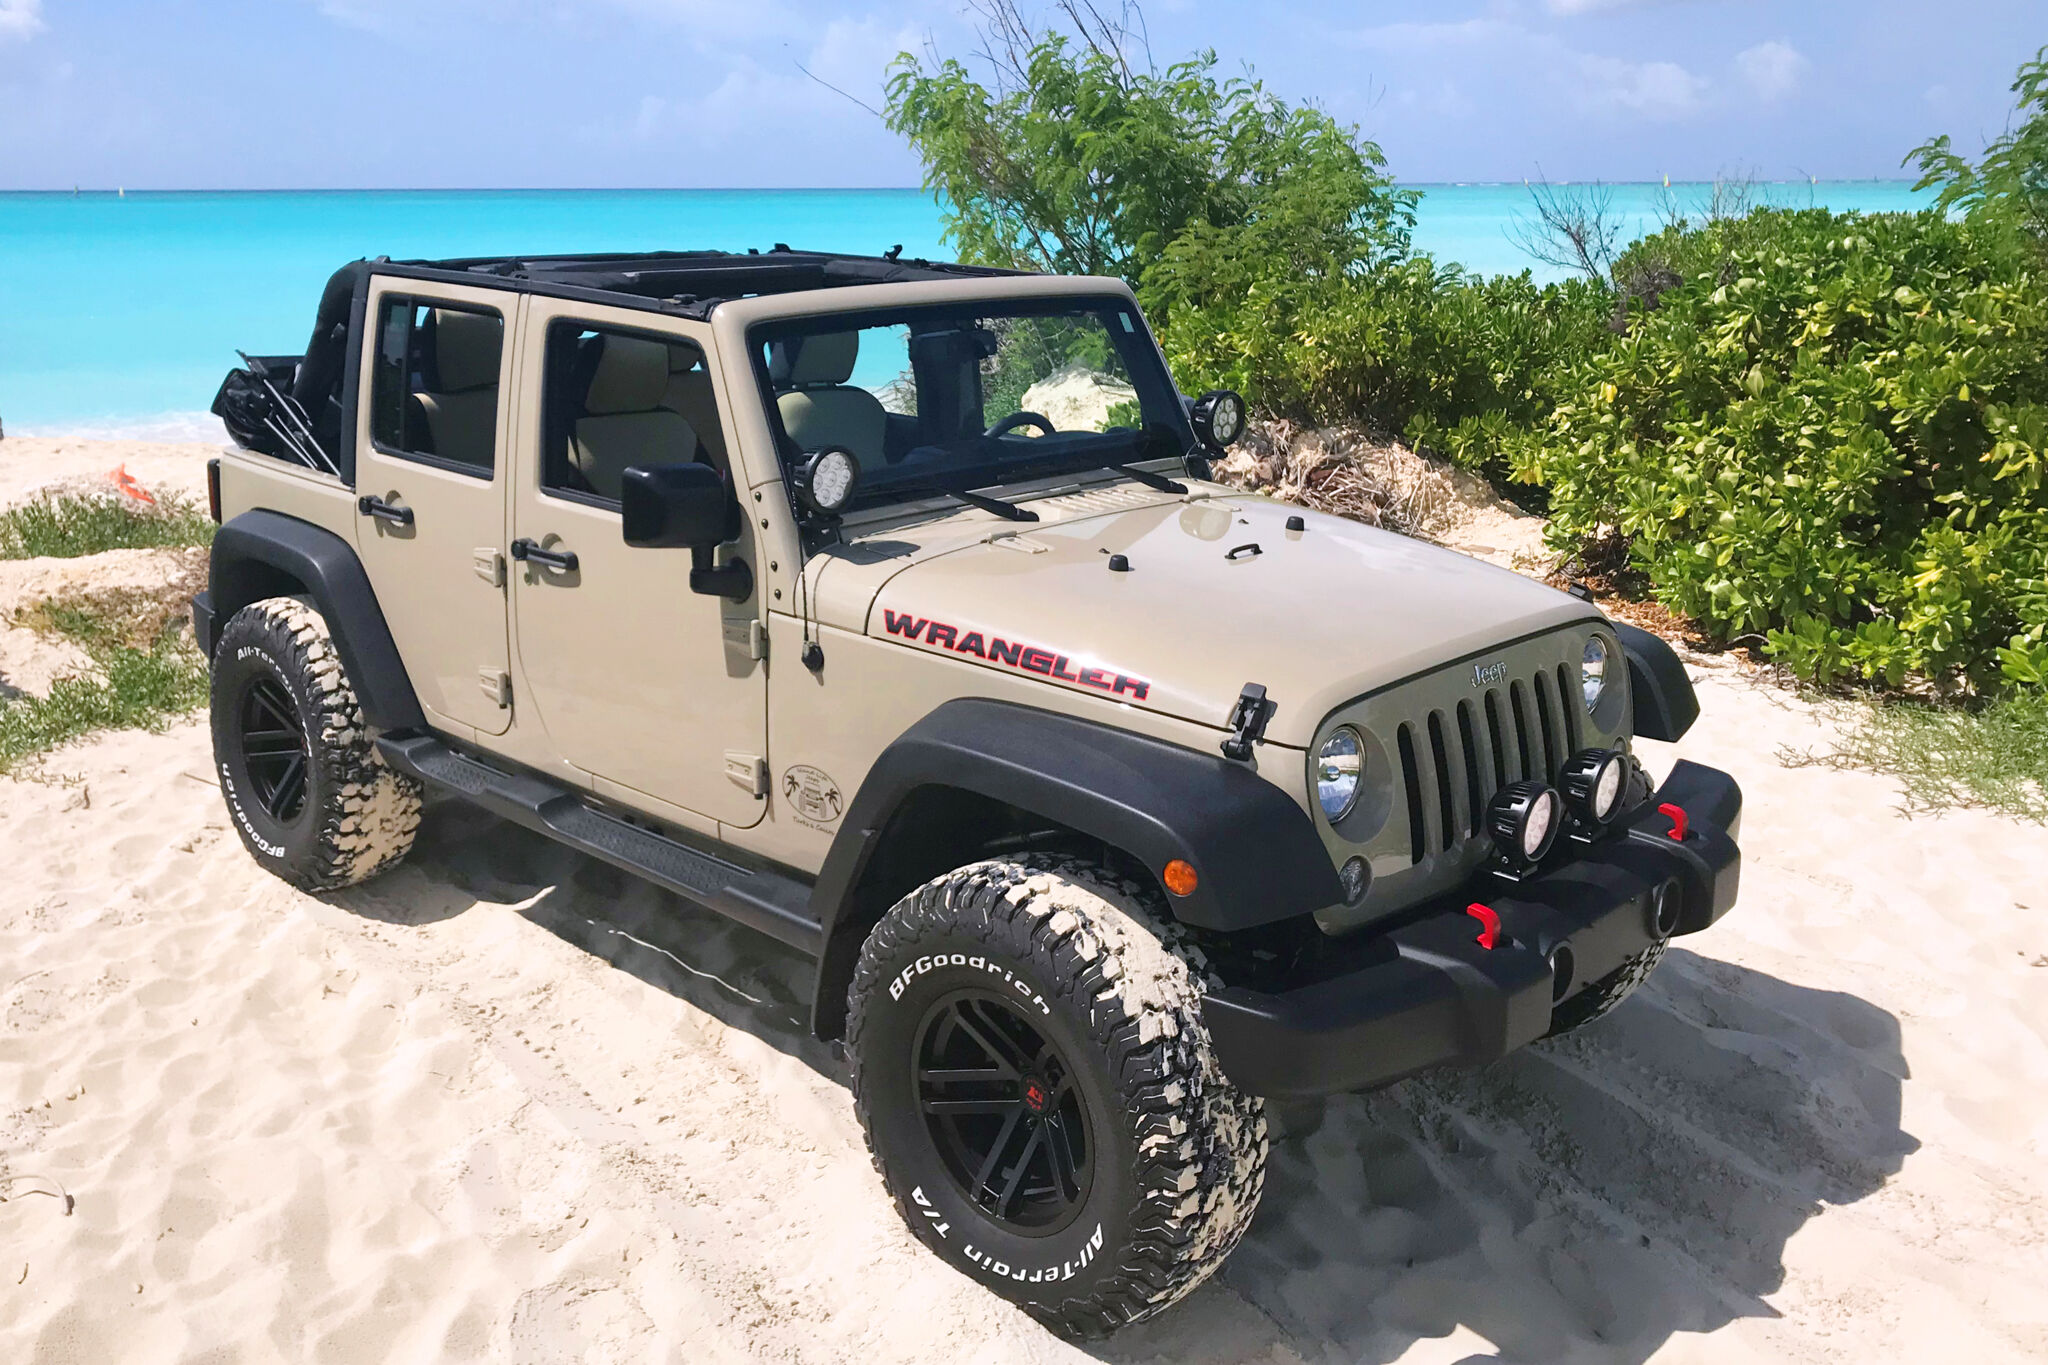 16 Things to Know Before Renting a Car in Turks and Caicos | Visit Turks  and Caicos Islands